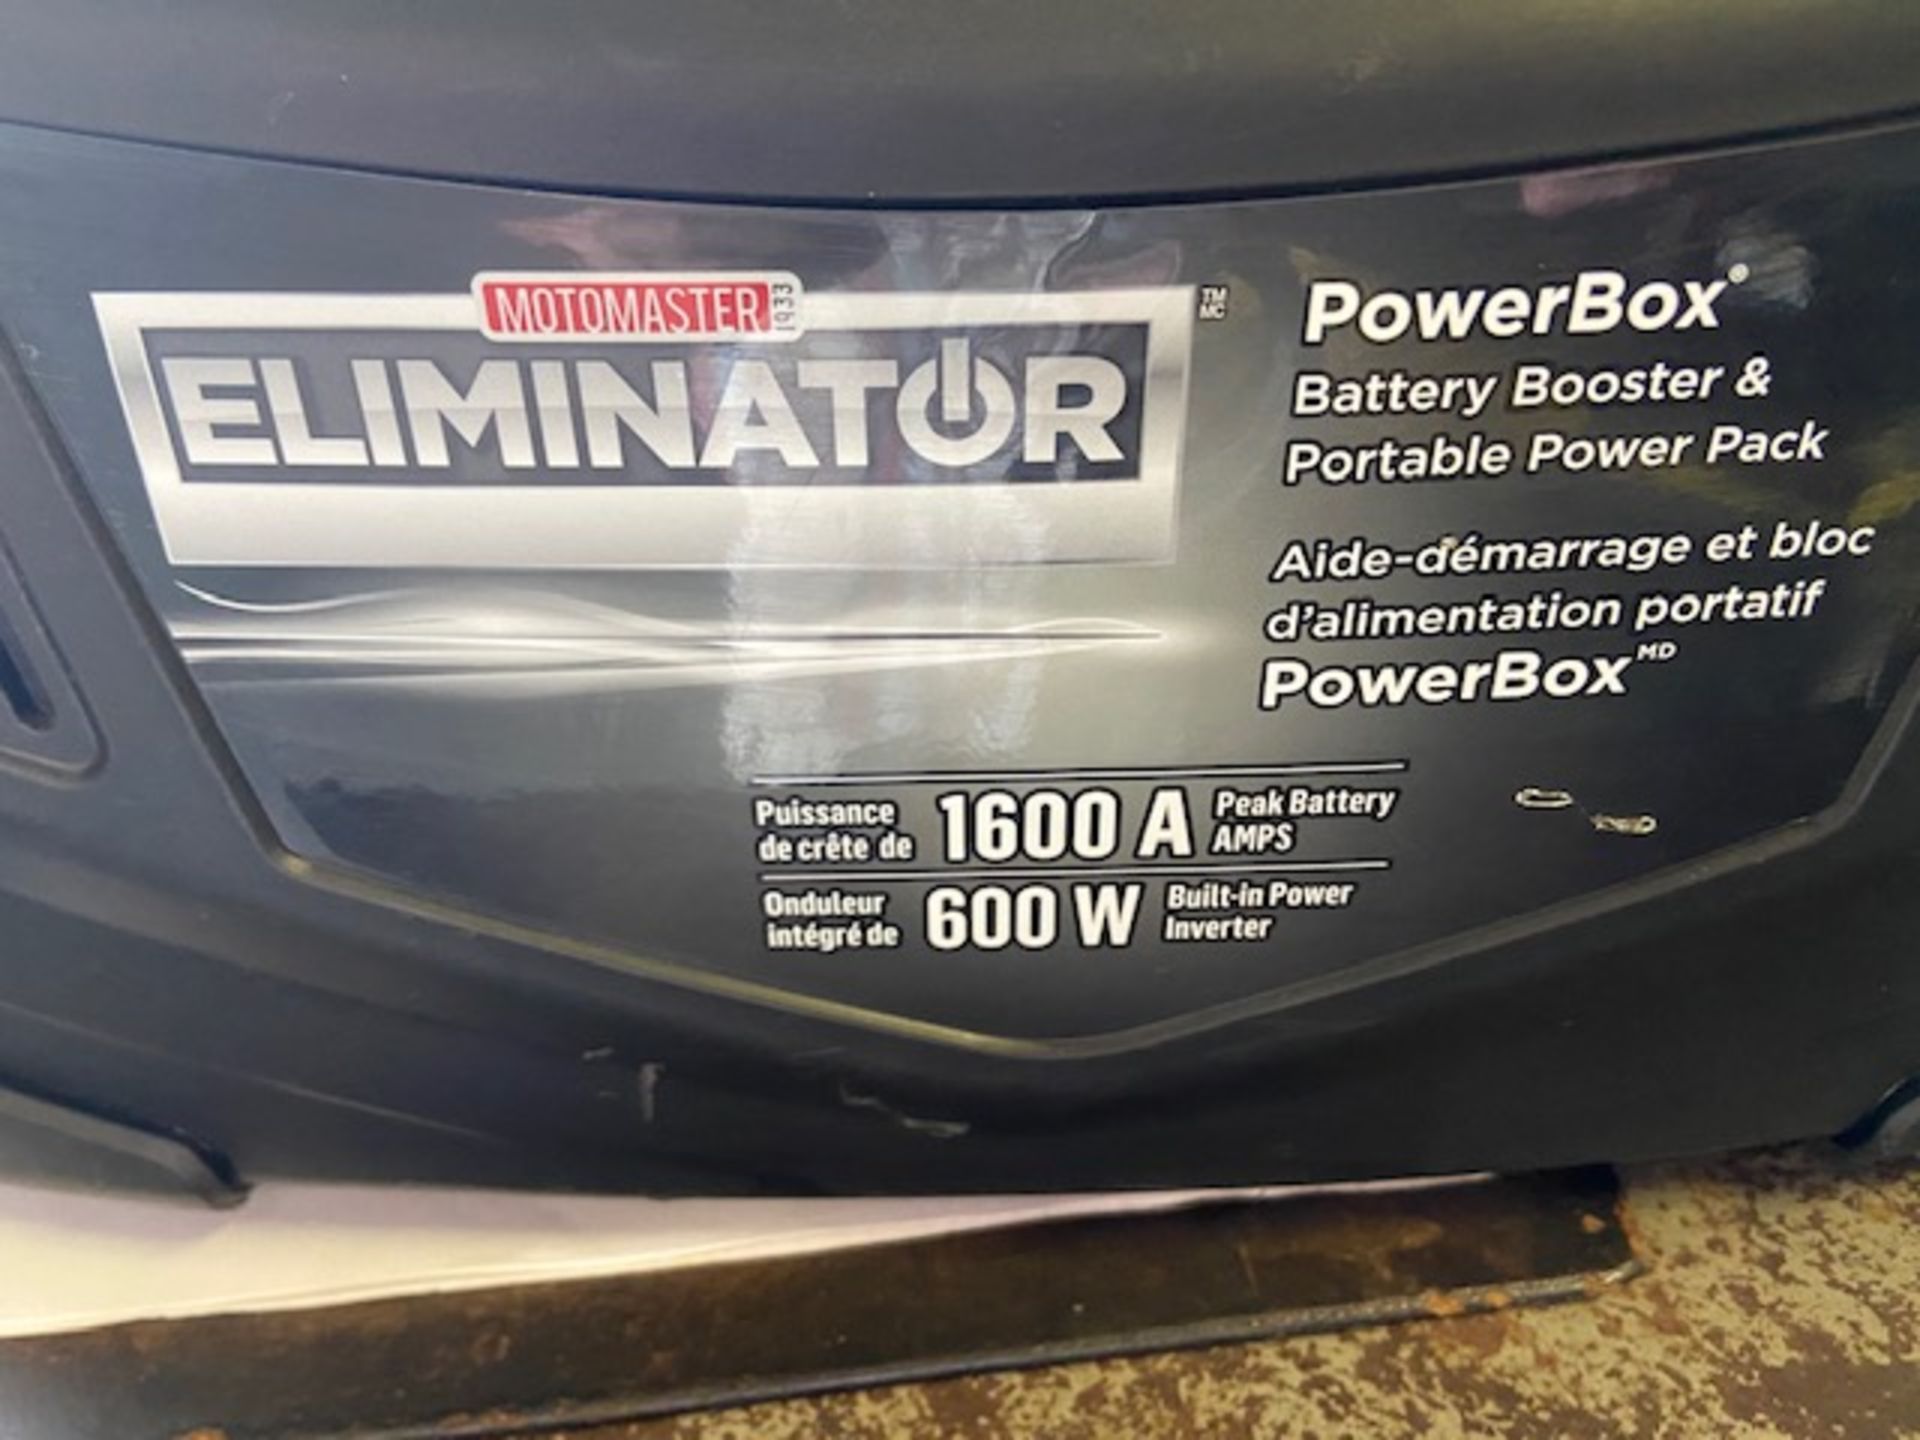 Eliminator Powerbox Battery Booster unit 1600A 600W portable power pack - Image 2 of 2